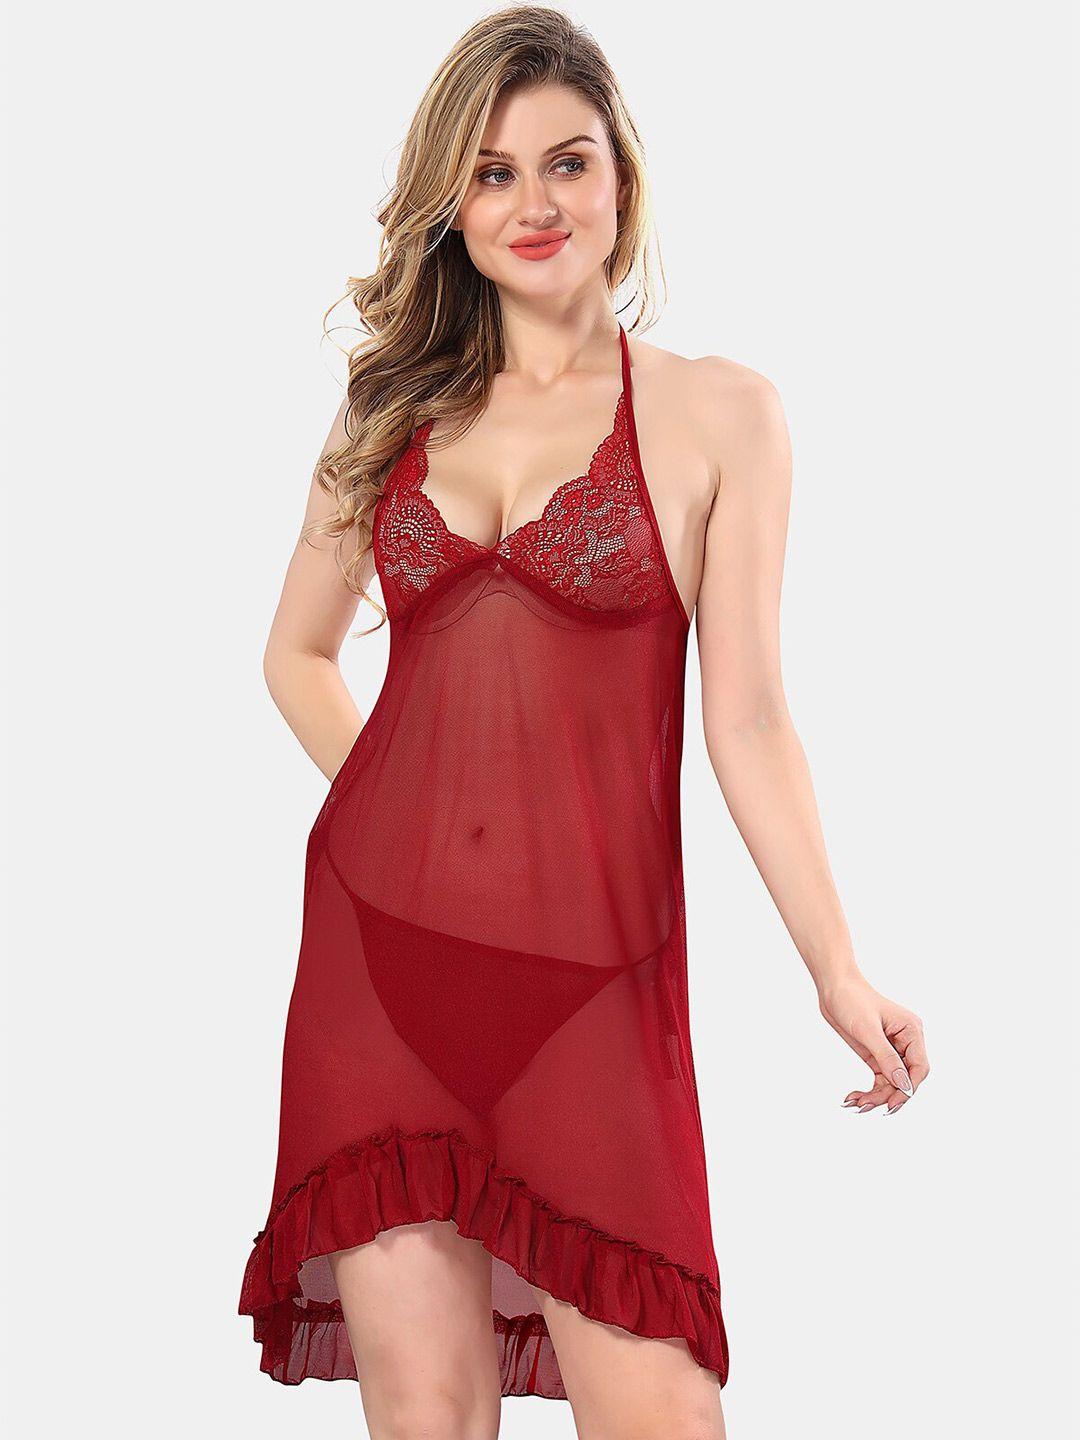 be you halter neck net baby doll with briefs